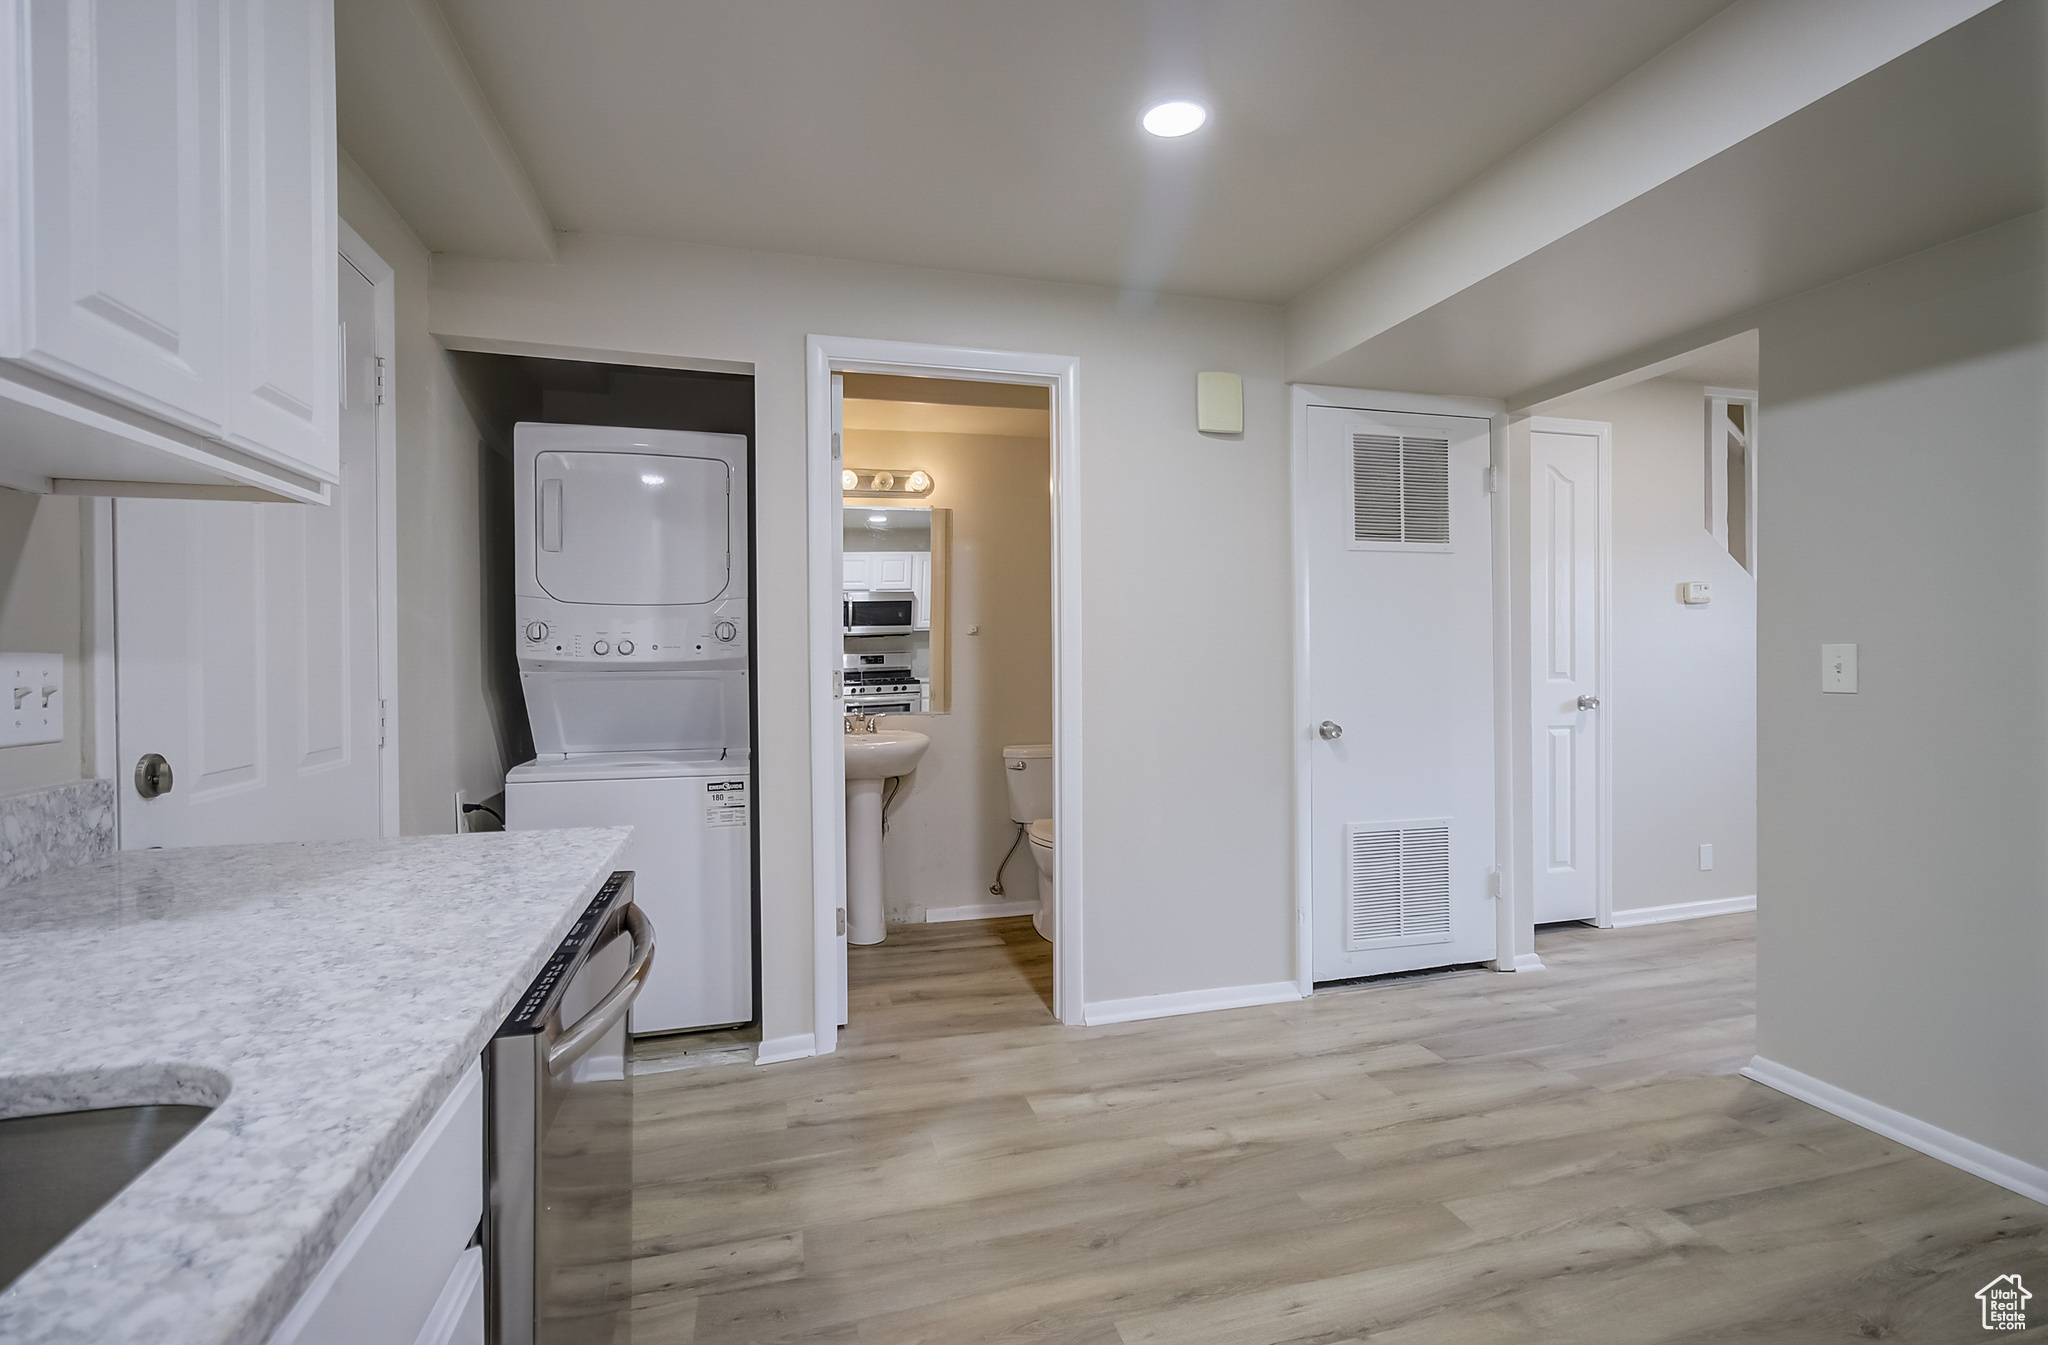 Kitchen featuring white cabinets, light hardwood / wood-style flooring, stainless steel appliances, and stacked washer and dryer